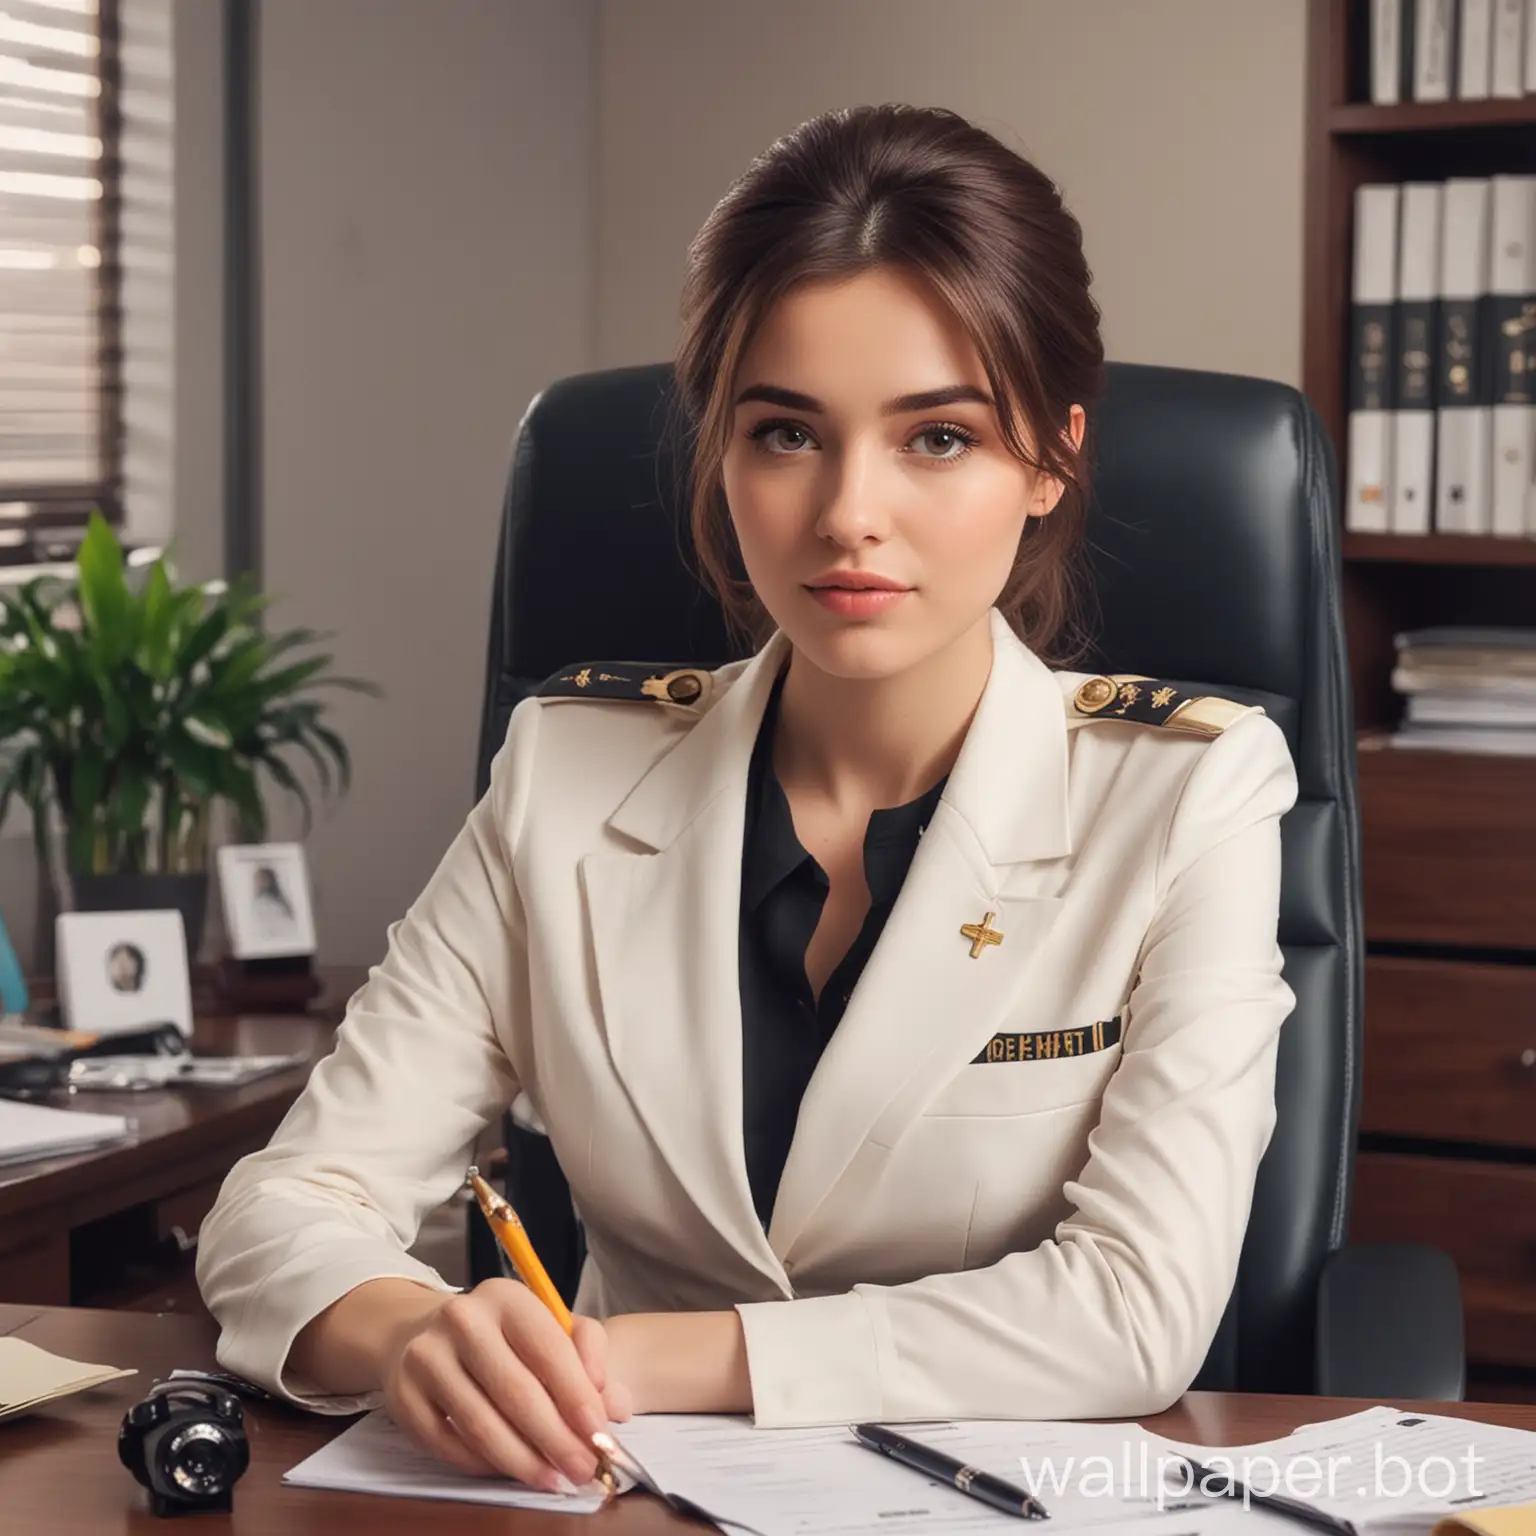 a cute aesthetic girl goverment officer sitting in office as a lady boss